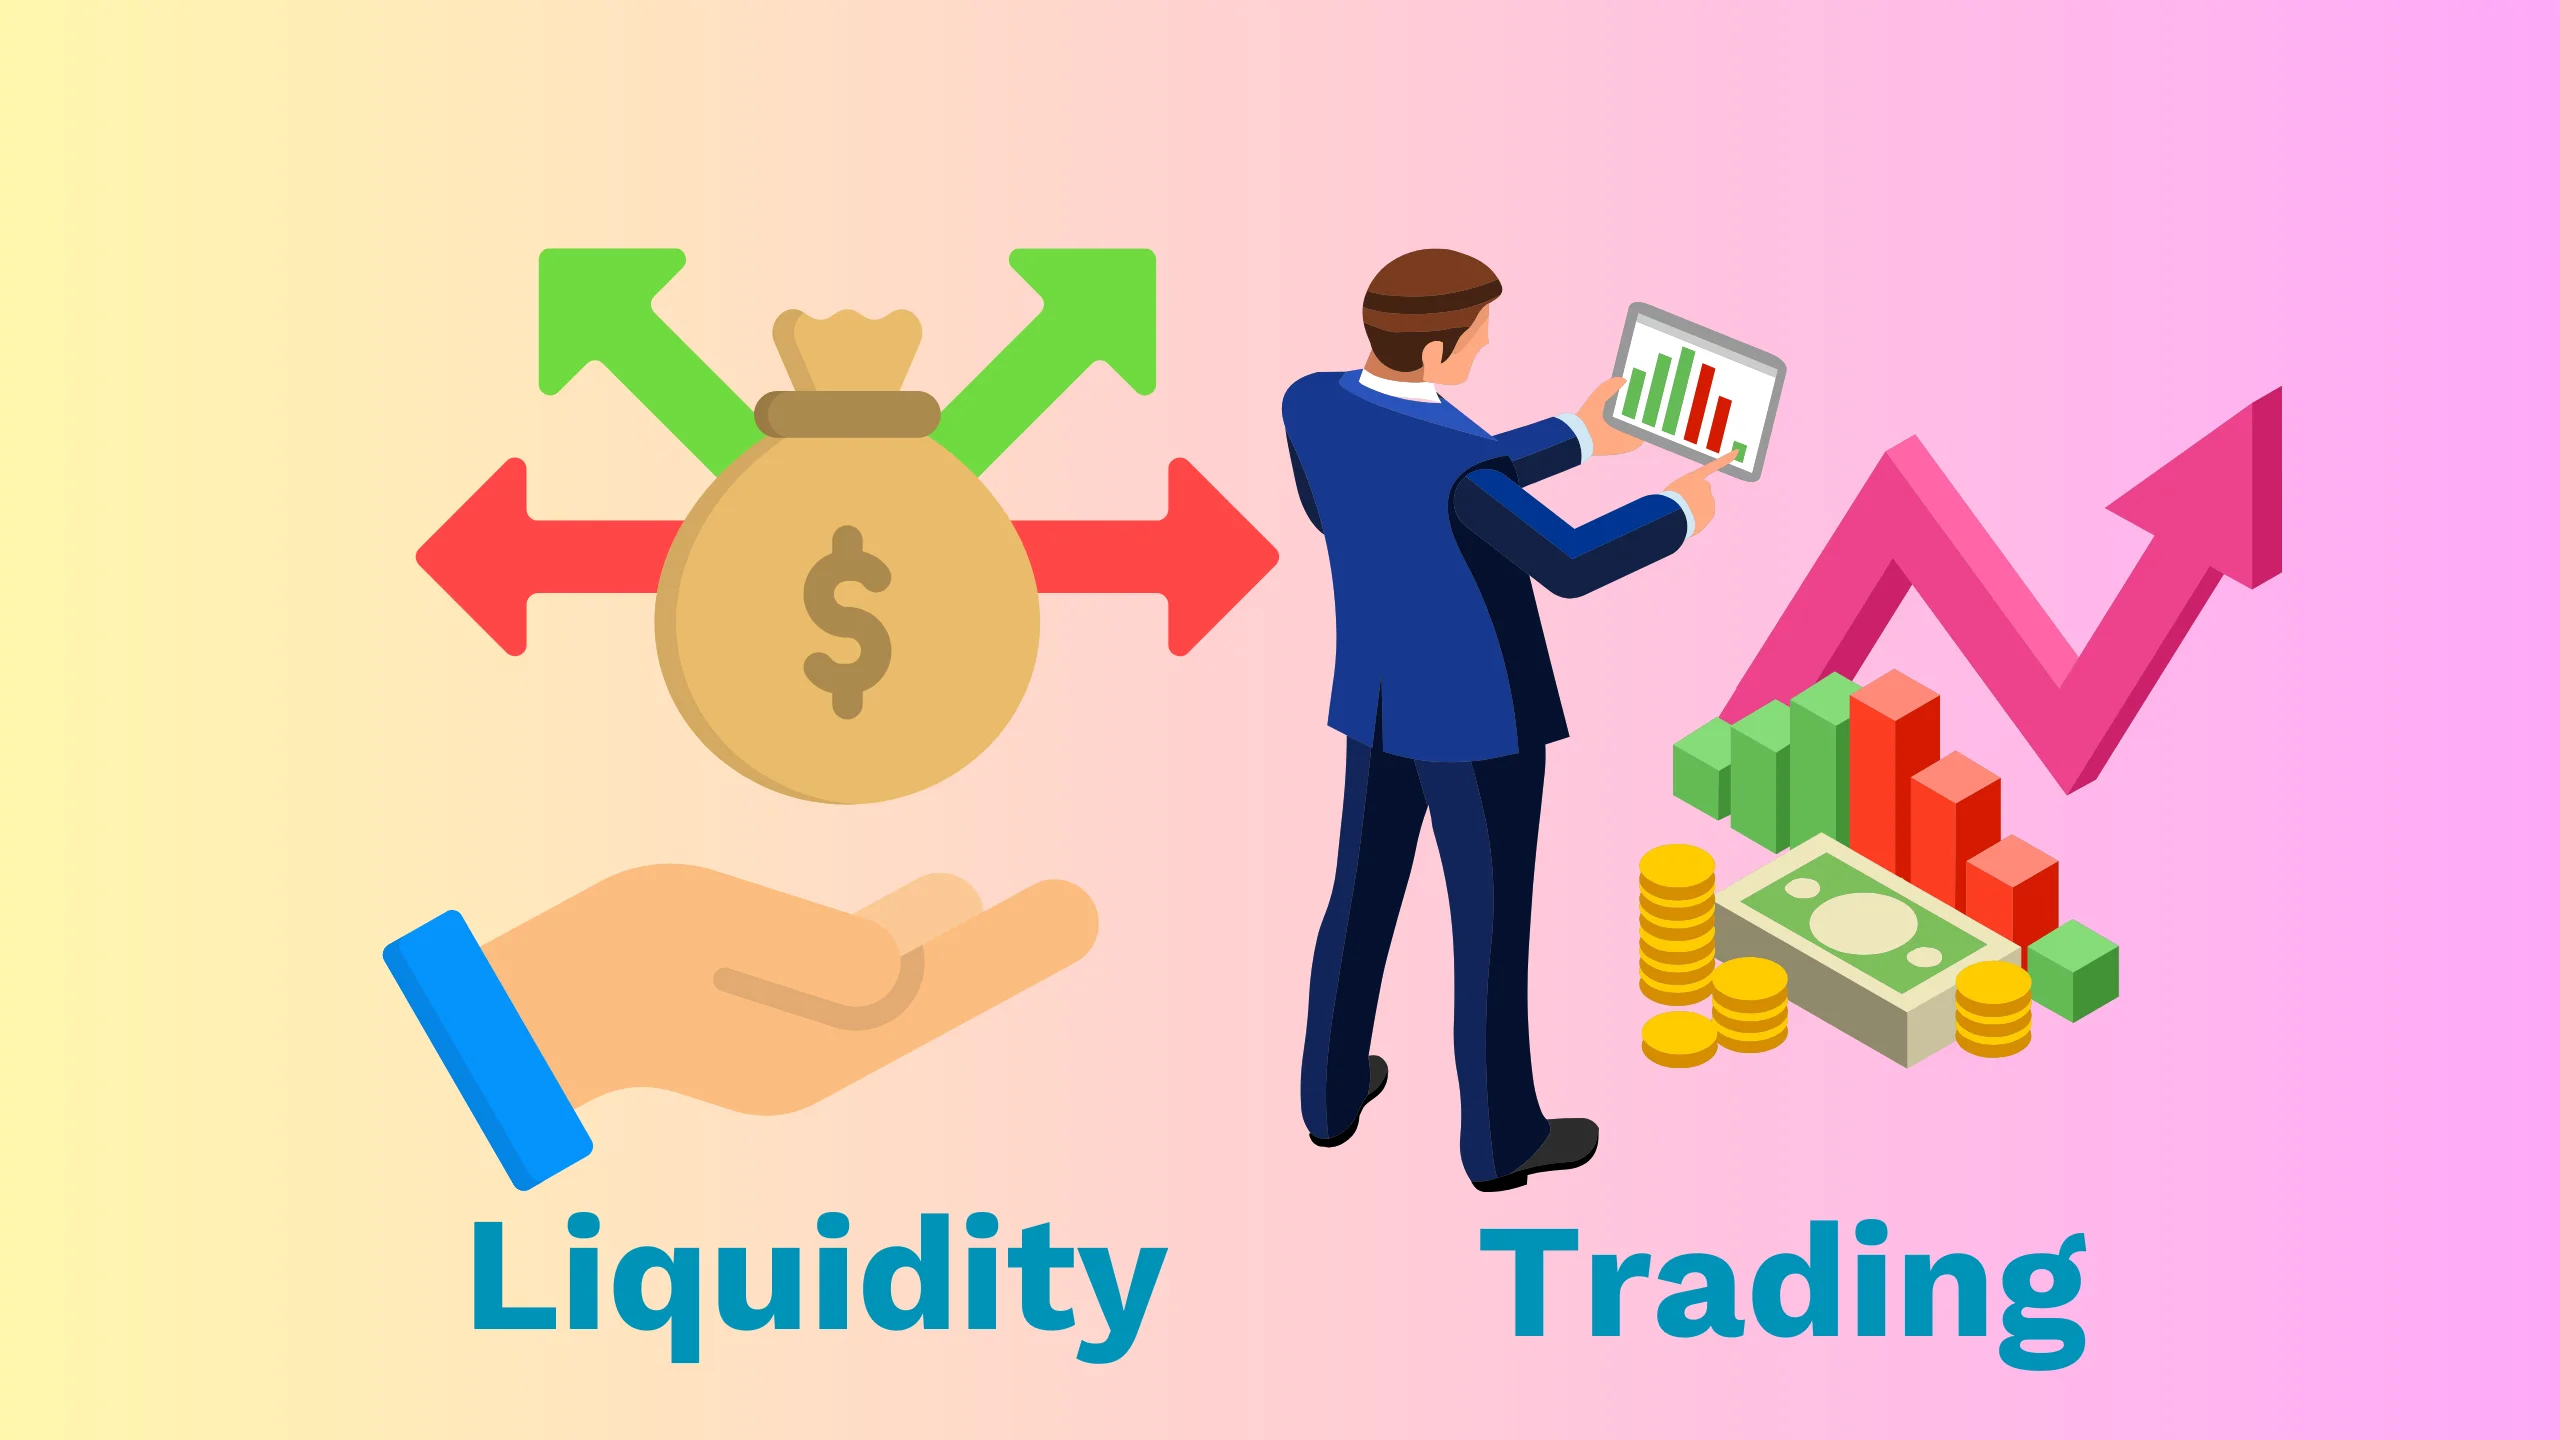 ICOs and Liquidity: ICOs do not guarantee immediate liquidity or trading opportunities, as these depend on market conditions and exchange listings.